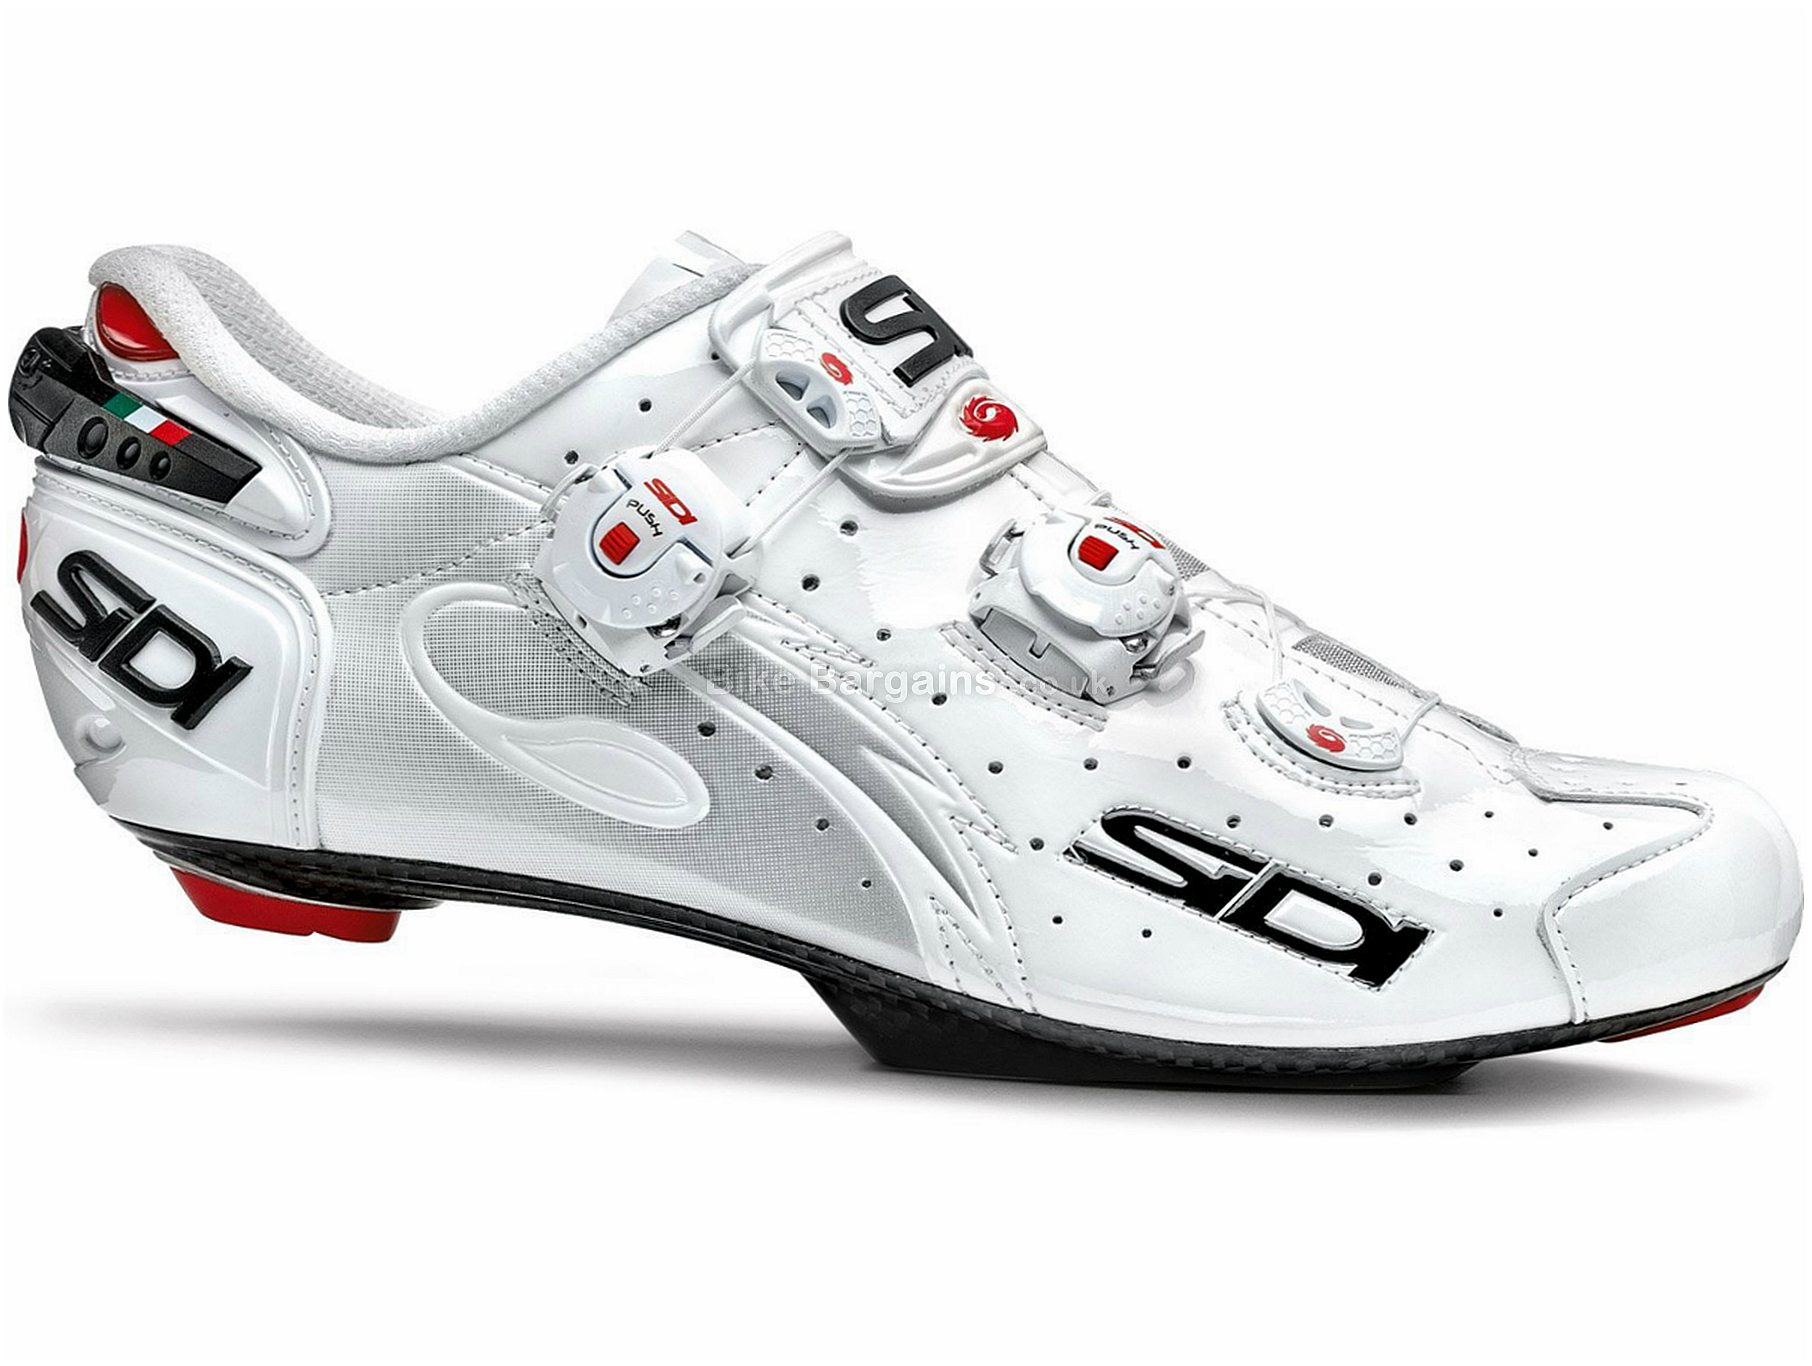 Sidi Wire Carbon Speedplay Vernice Road Shoes (Expired) | Shoes